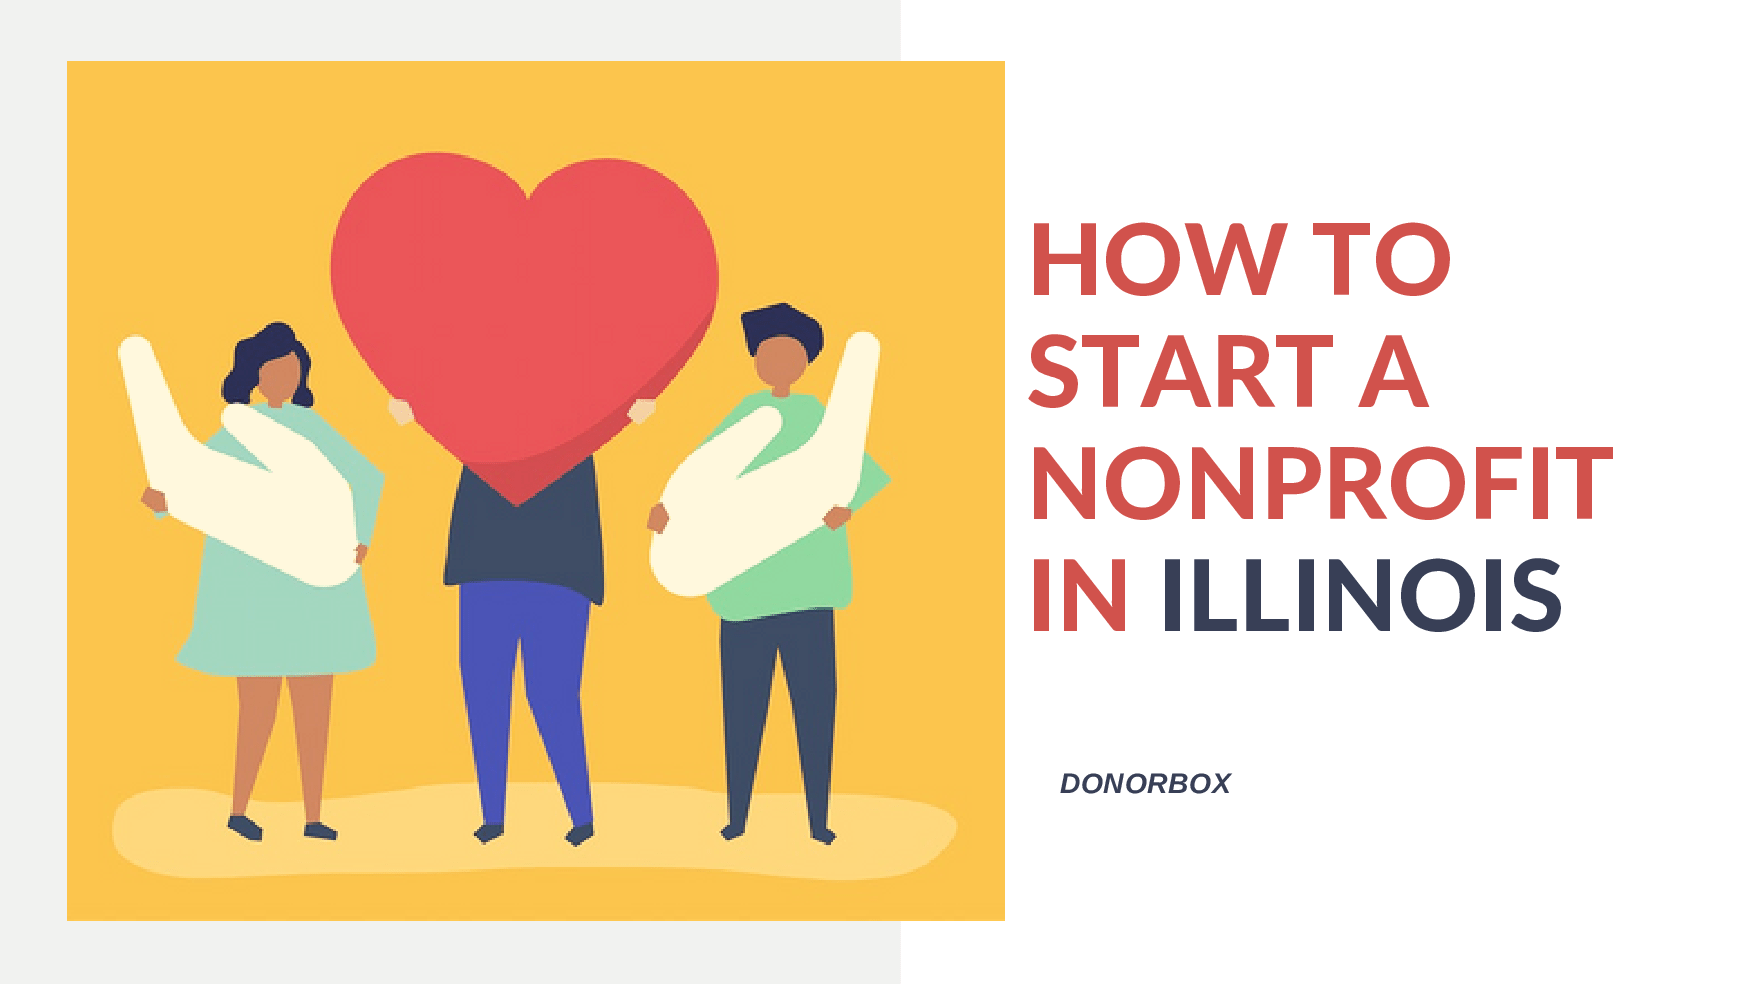 How to Start a Nonprofit in Illinois